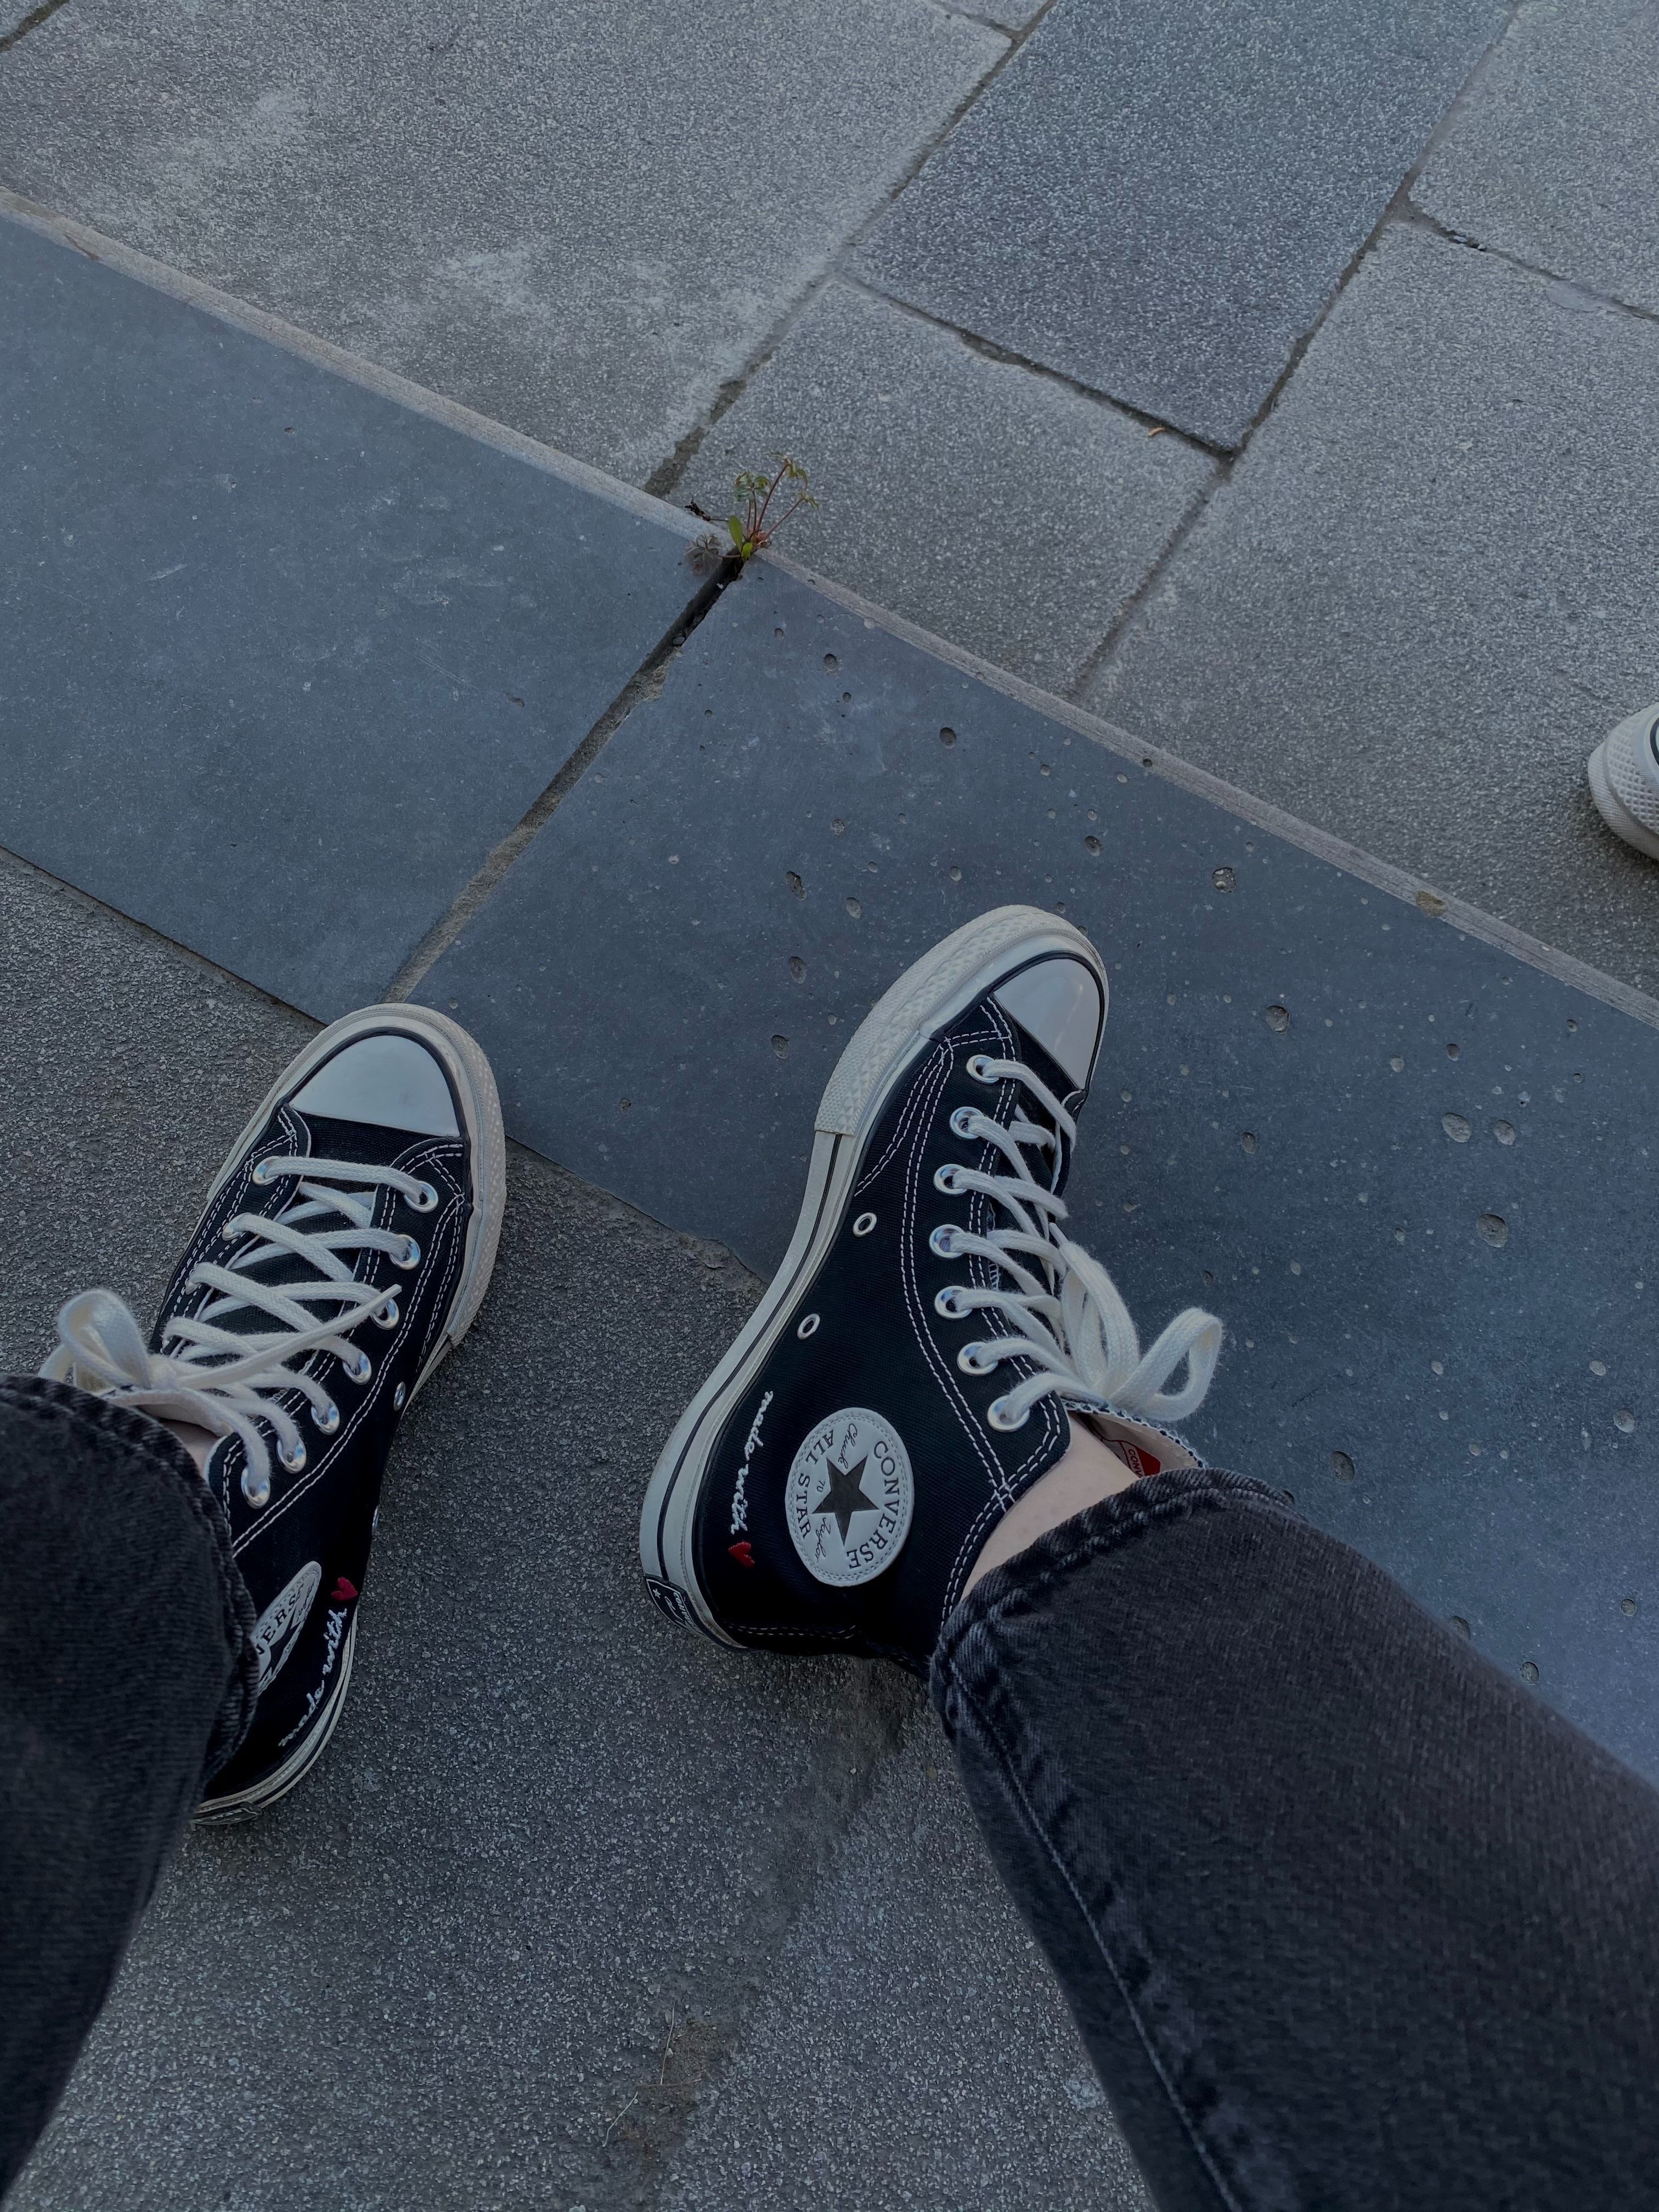 A Person Wearing a Black and White Converse · Free